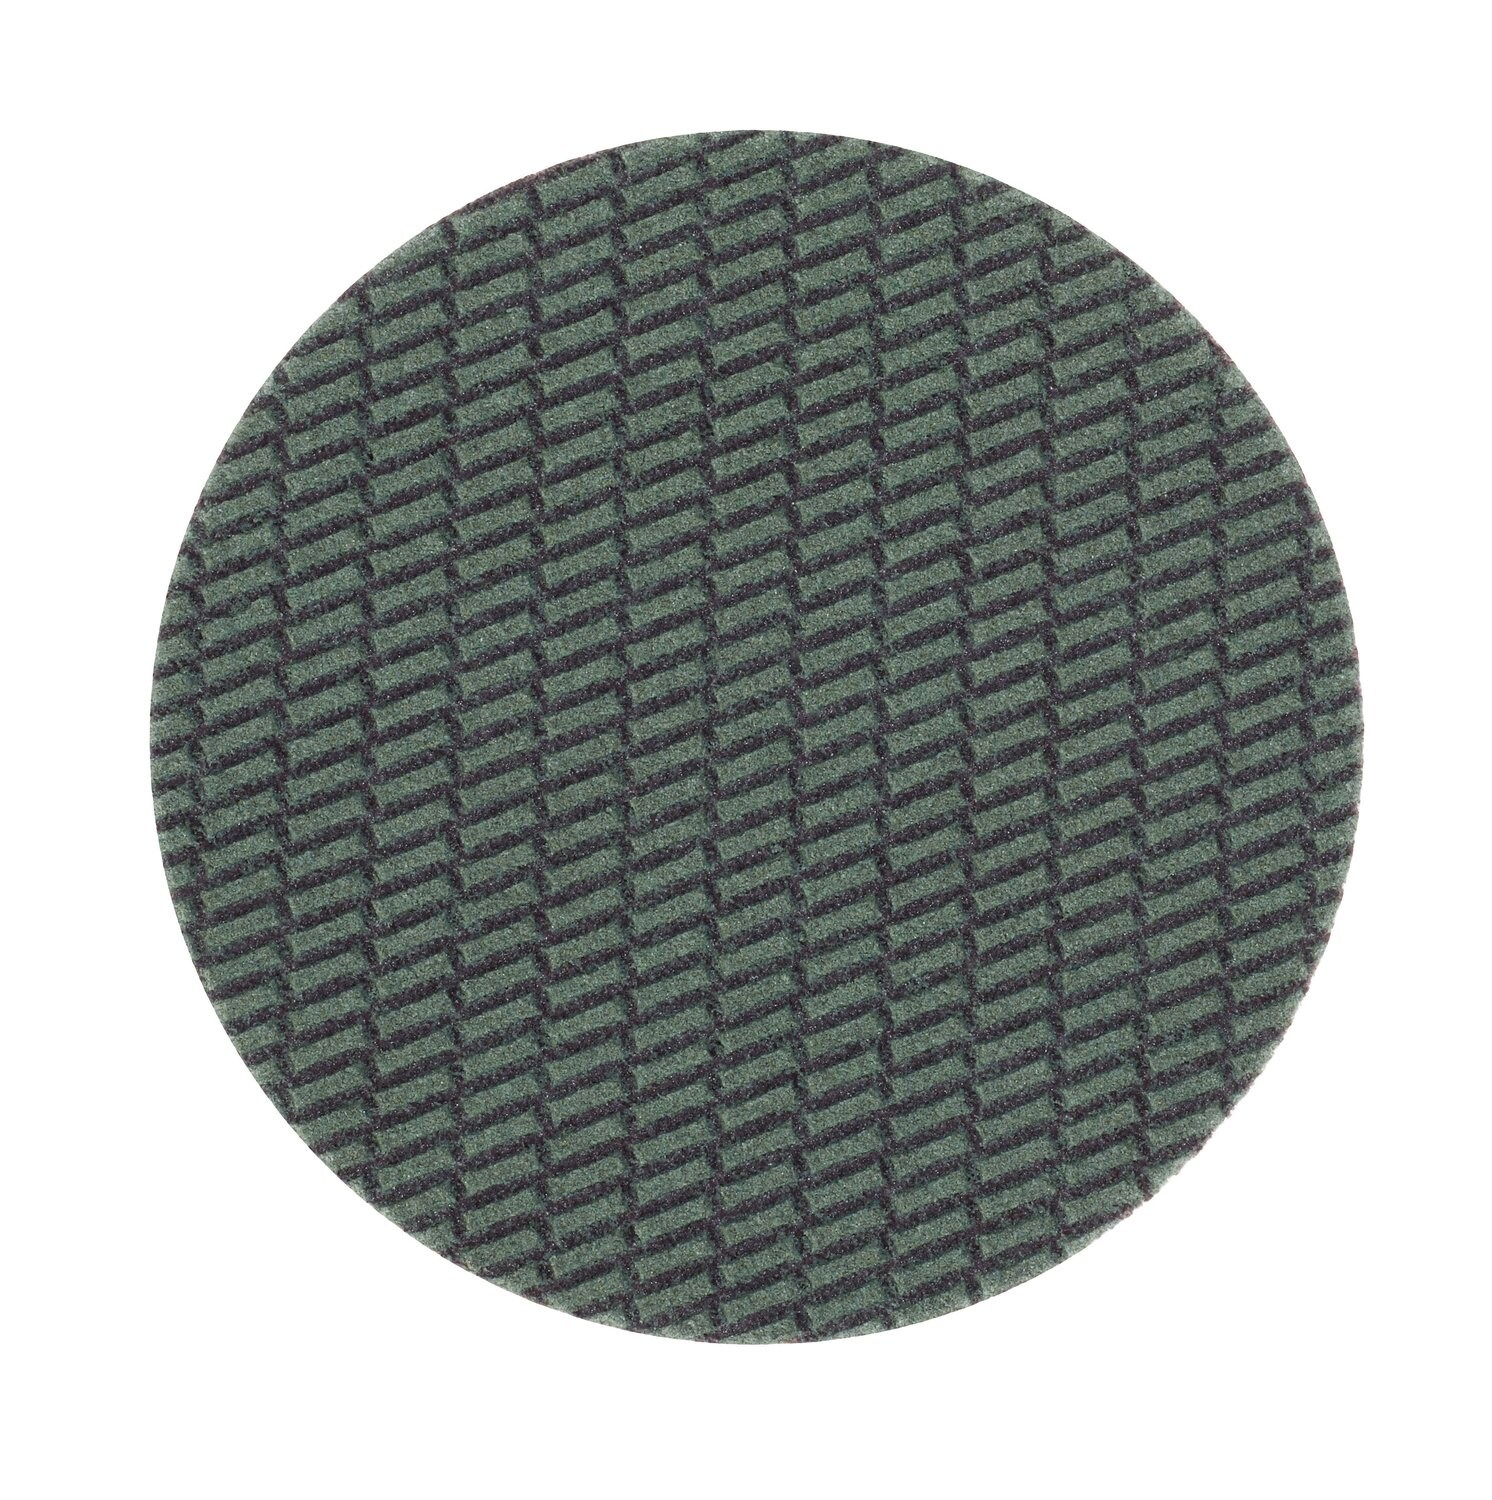 7000139410 - 3M Trizact Hookit Cloth Disc 337DC, 5 in x NH, A160 X-weight, 50
ea/Case